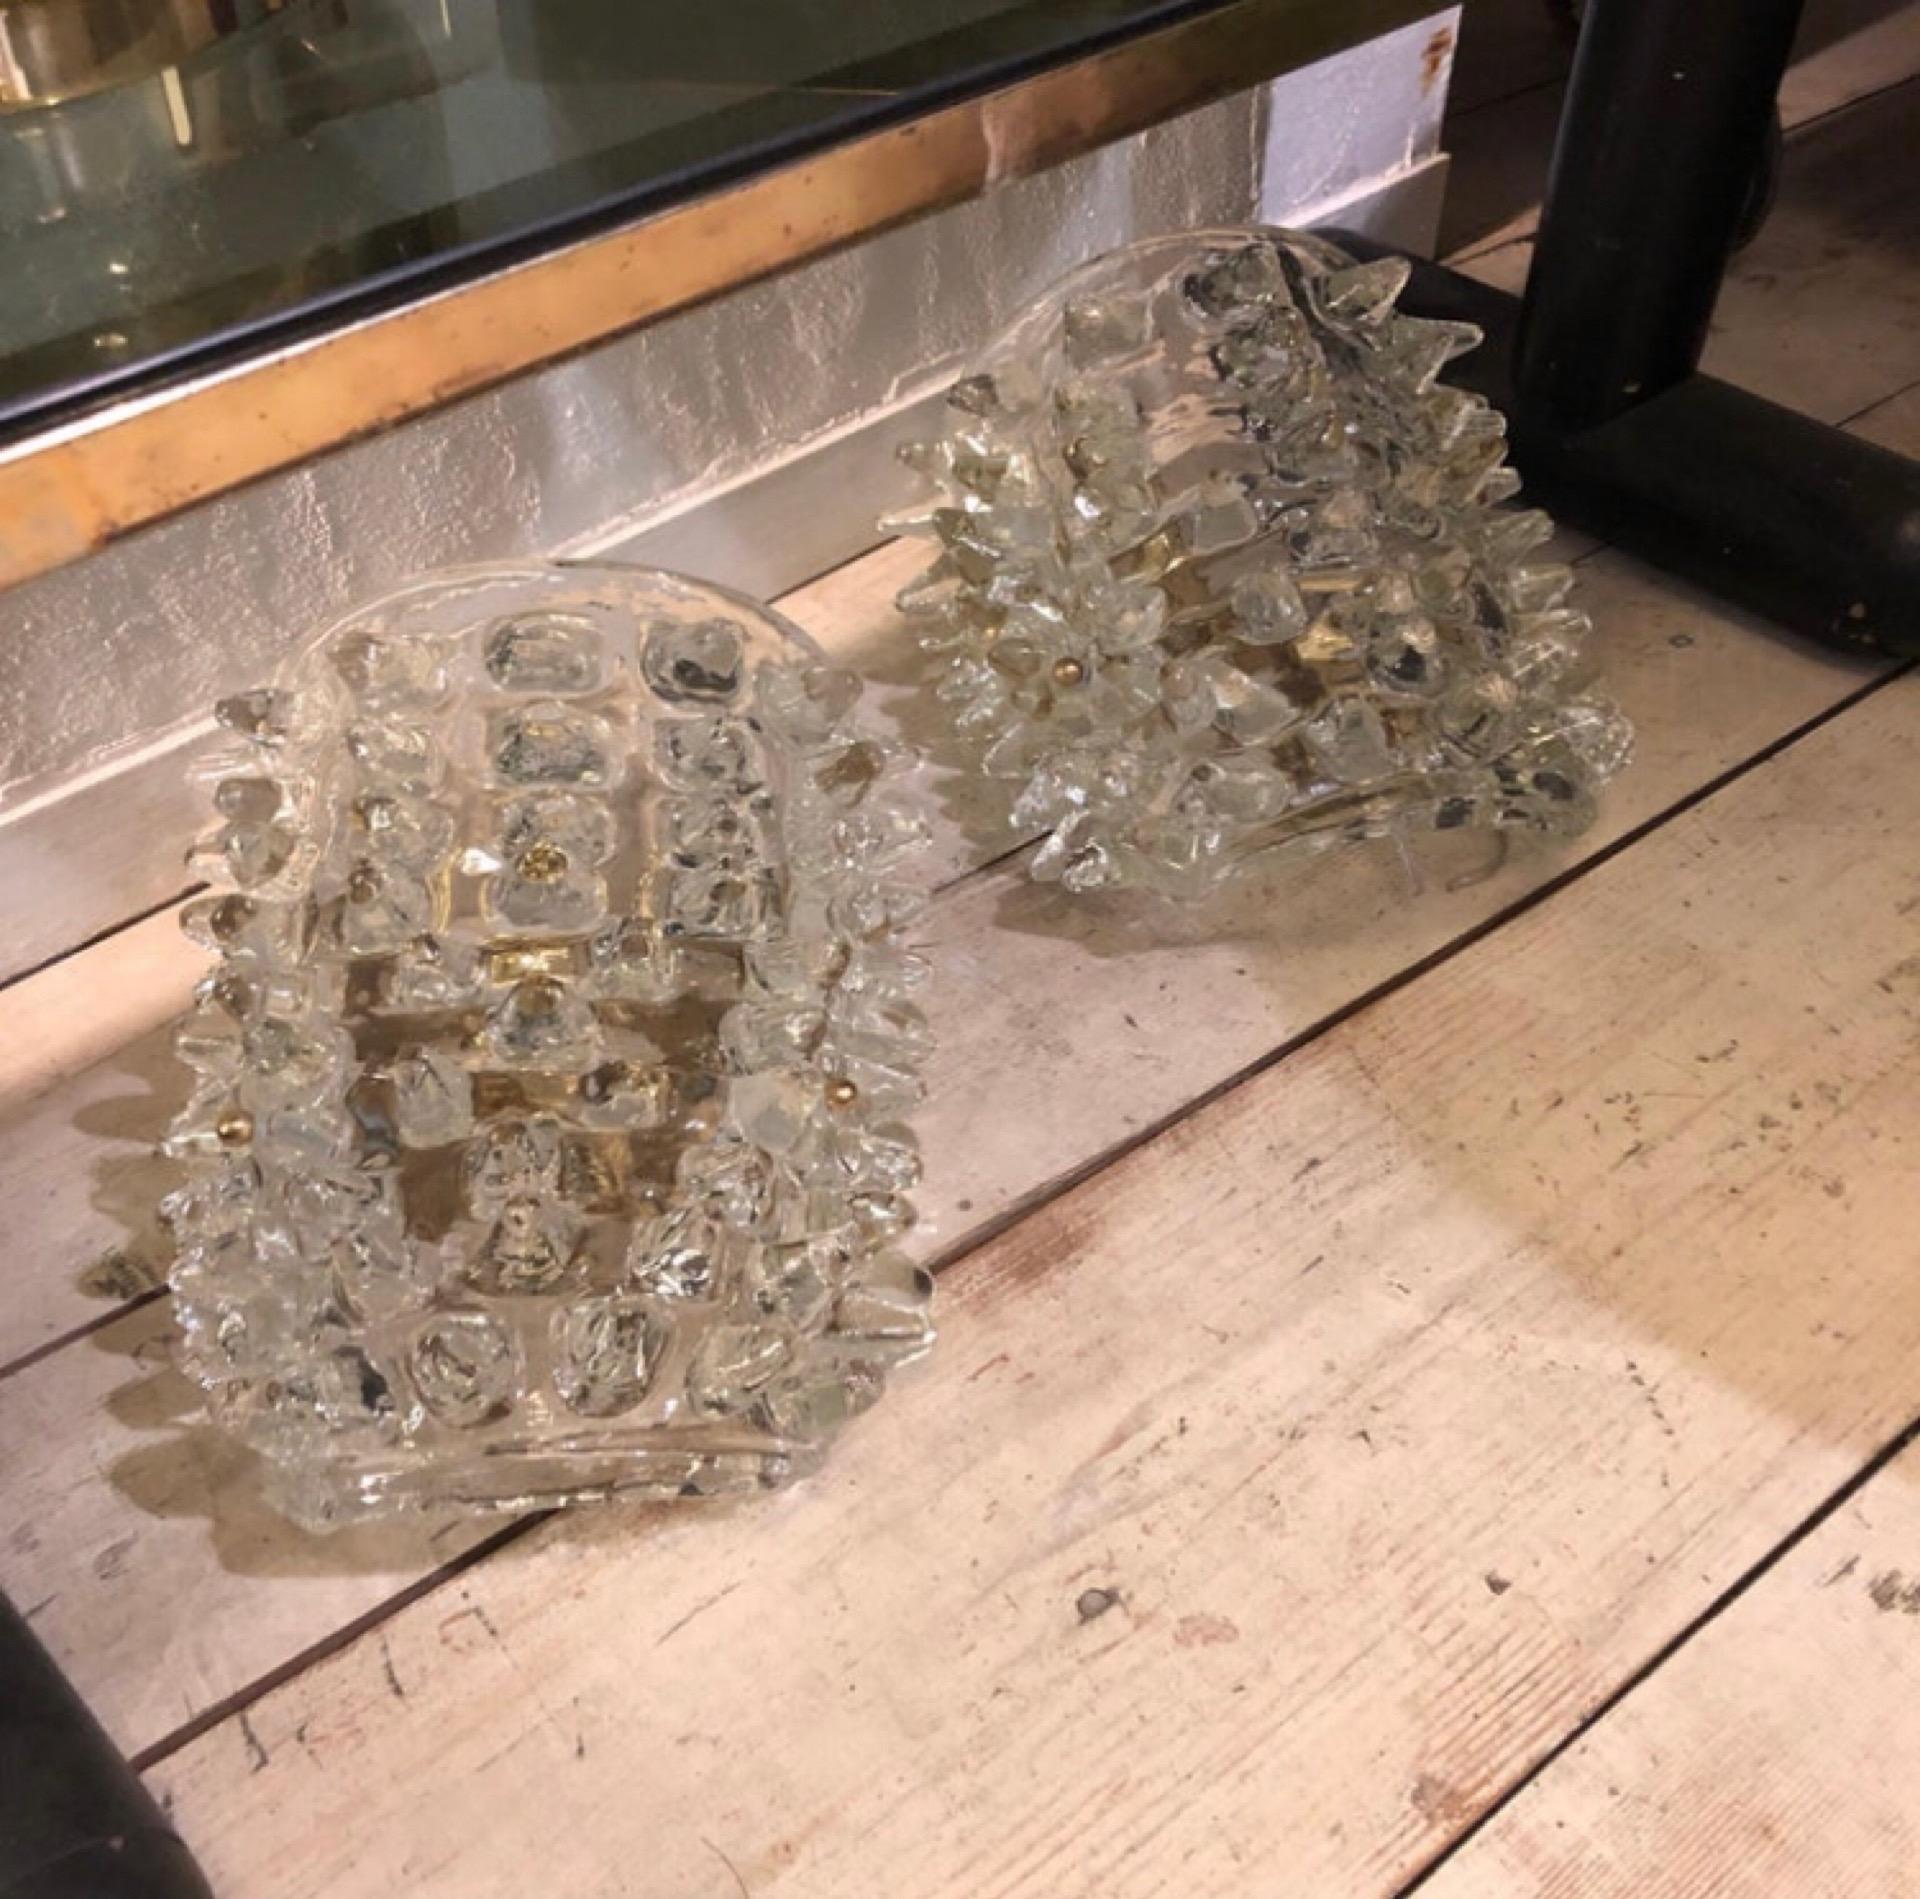 It's a particular kind of large Mid-Century Modern Italian wall sconces, Murano glasses are original from the 1980s, the brass parts are totally restored as the electrical parts, they work 110-240 volts and need 4 regular e27 bulbs. Weight is 5/6